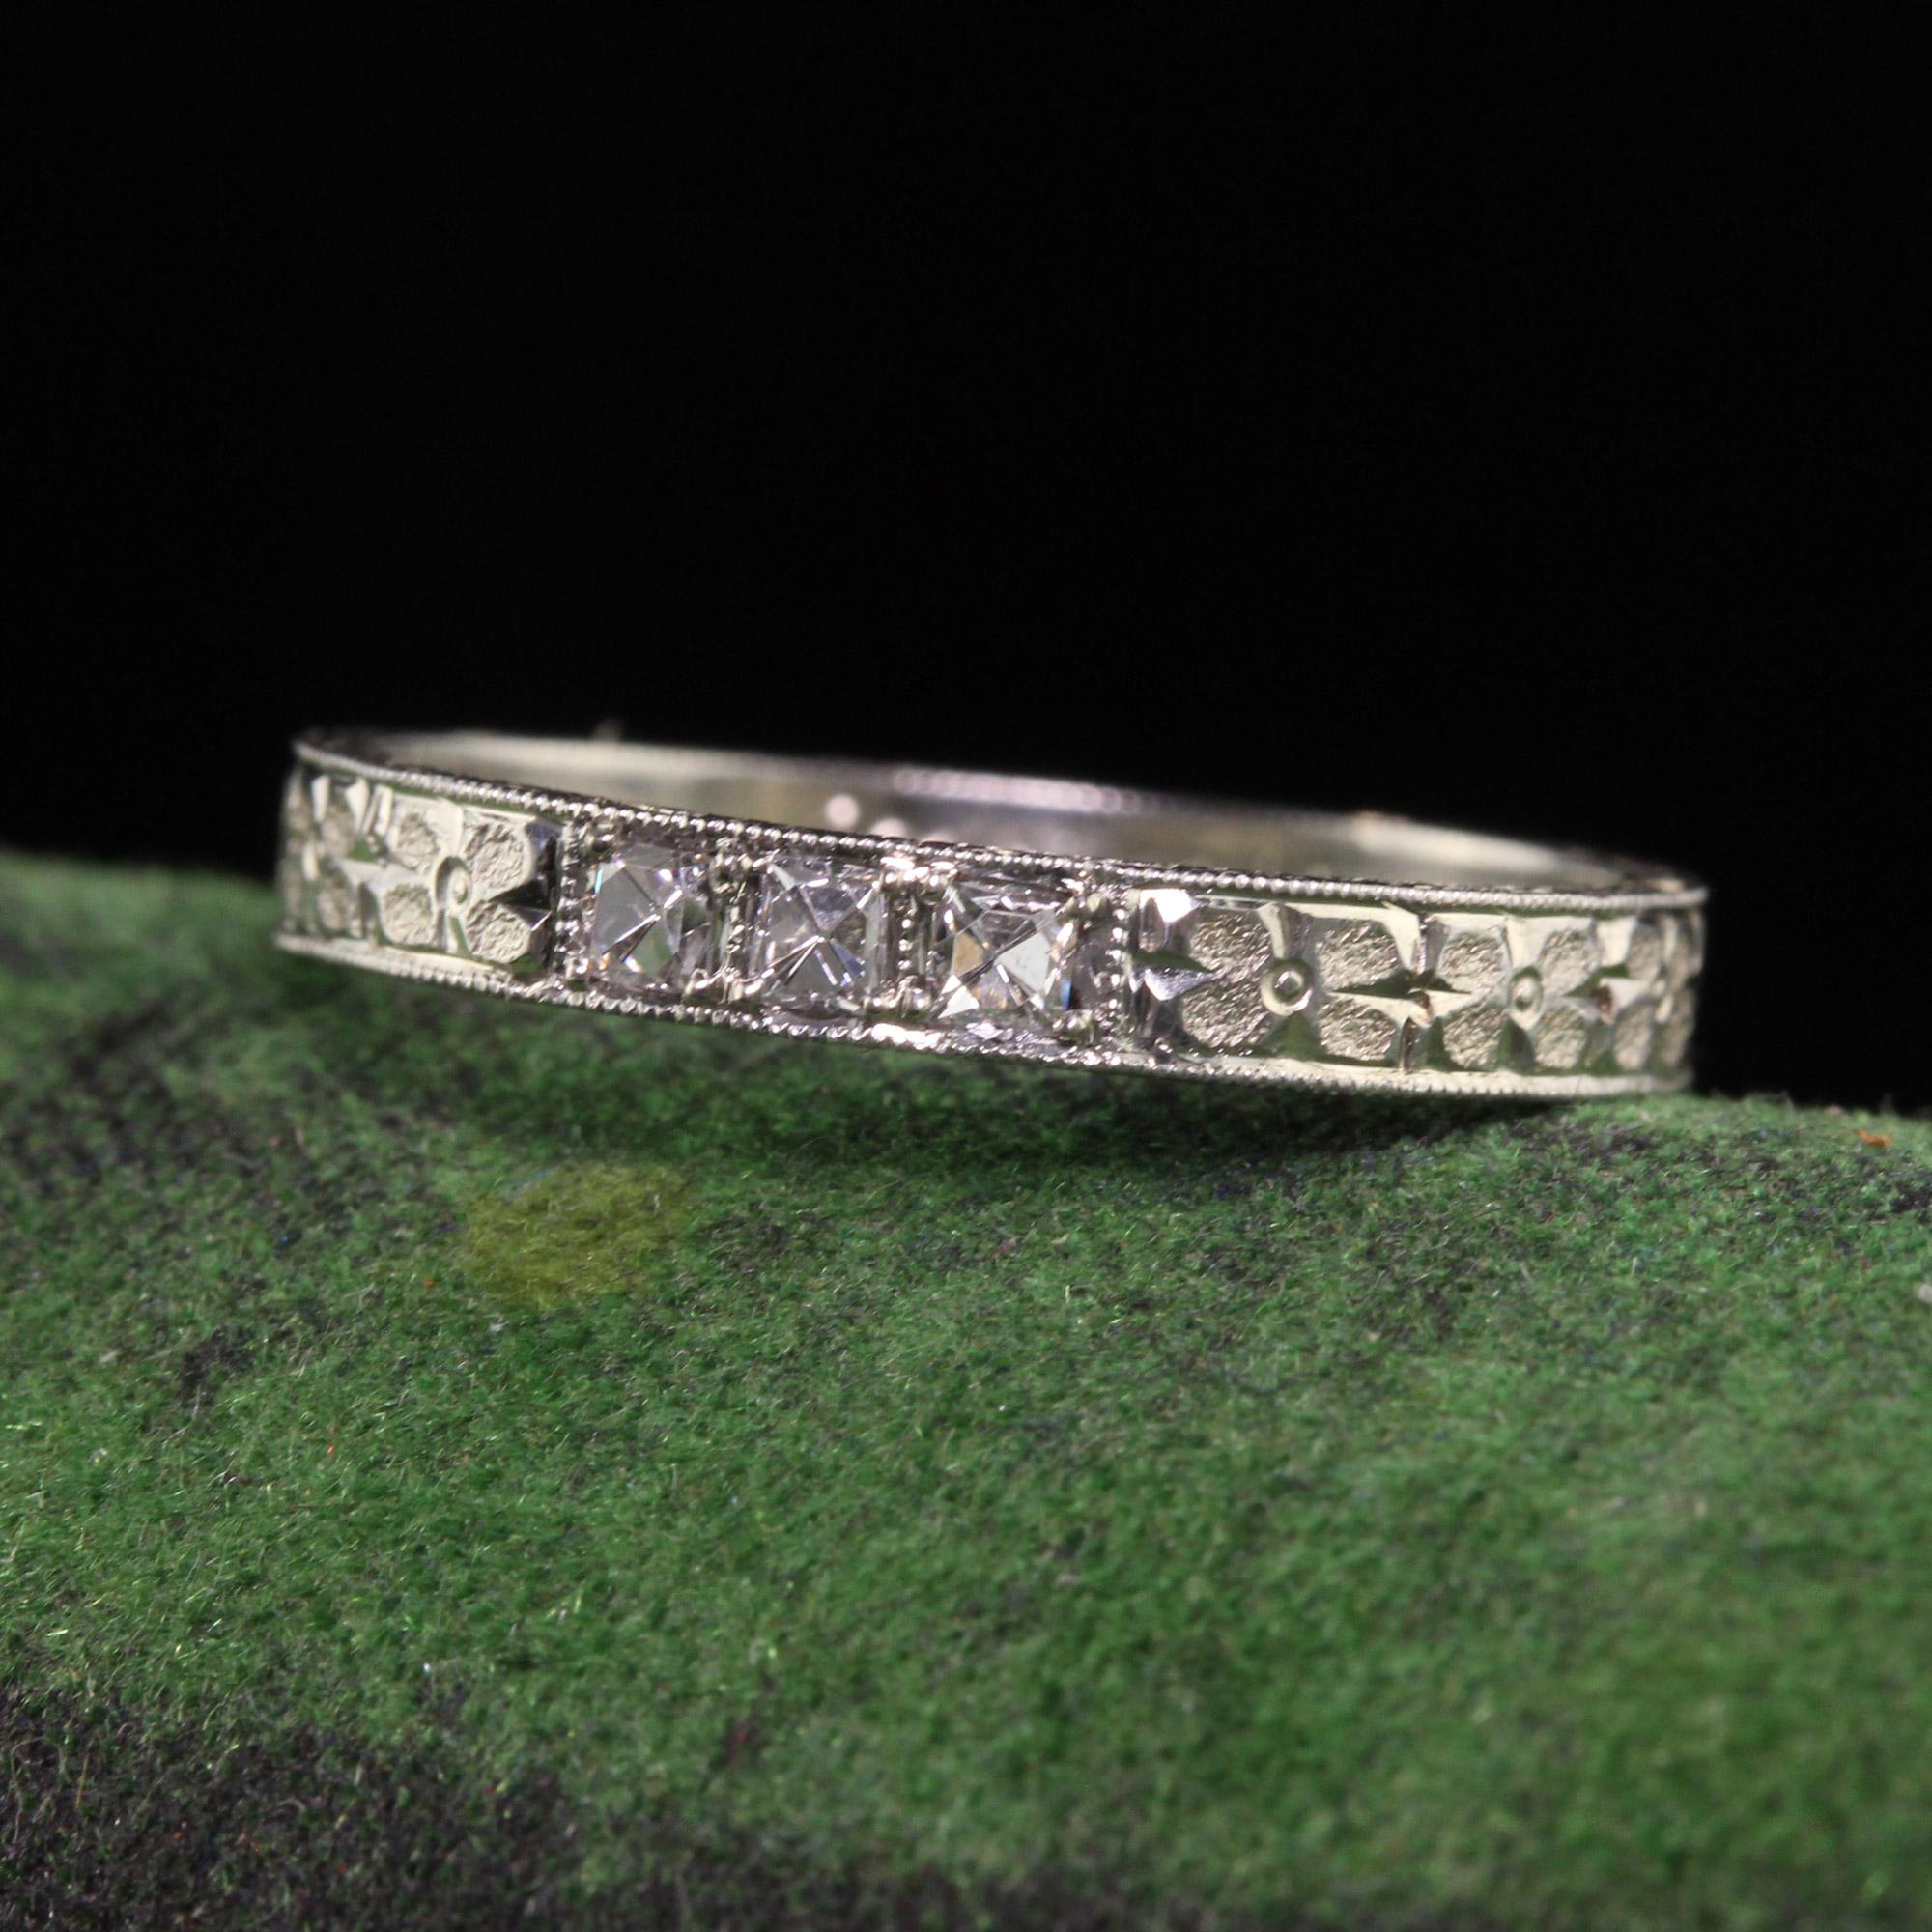 Beautiful Antique Art Deco 18K White Gold Mayflower French Cut Diamond Wedding Band - Size 5 1/2. This beautiful wedding band is crafted in white gold. The ring has french cut diamonds on the top of the ring with deep engravings going around the